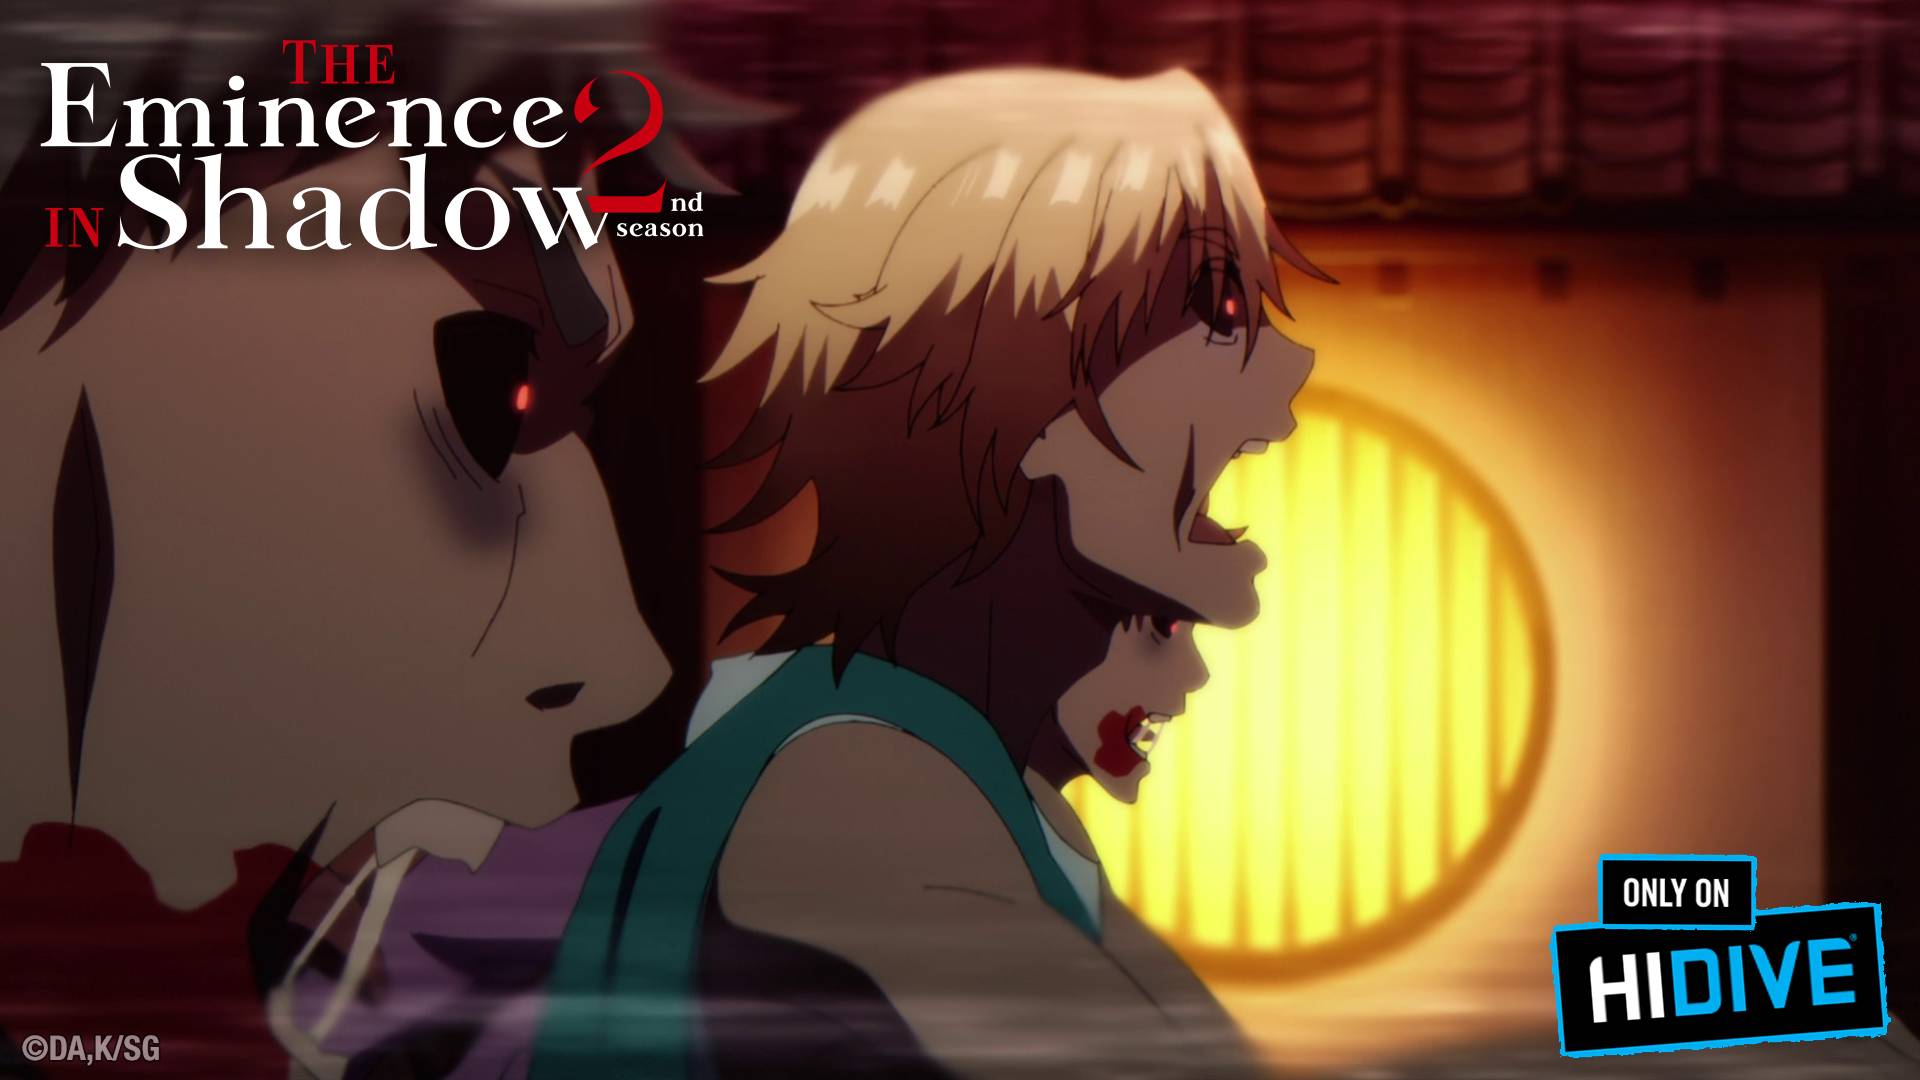 HIDIVE to Simulcast 'The Eminence in Shadow' S2 Sub & Dub